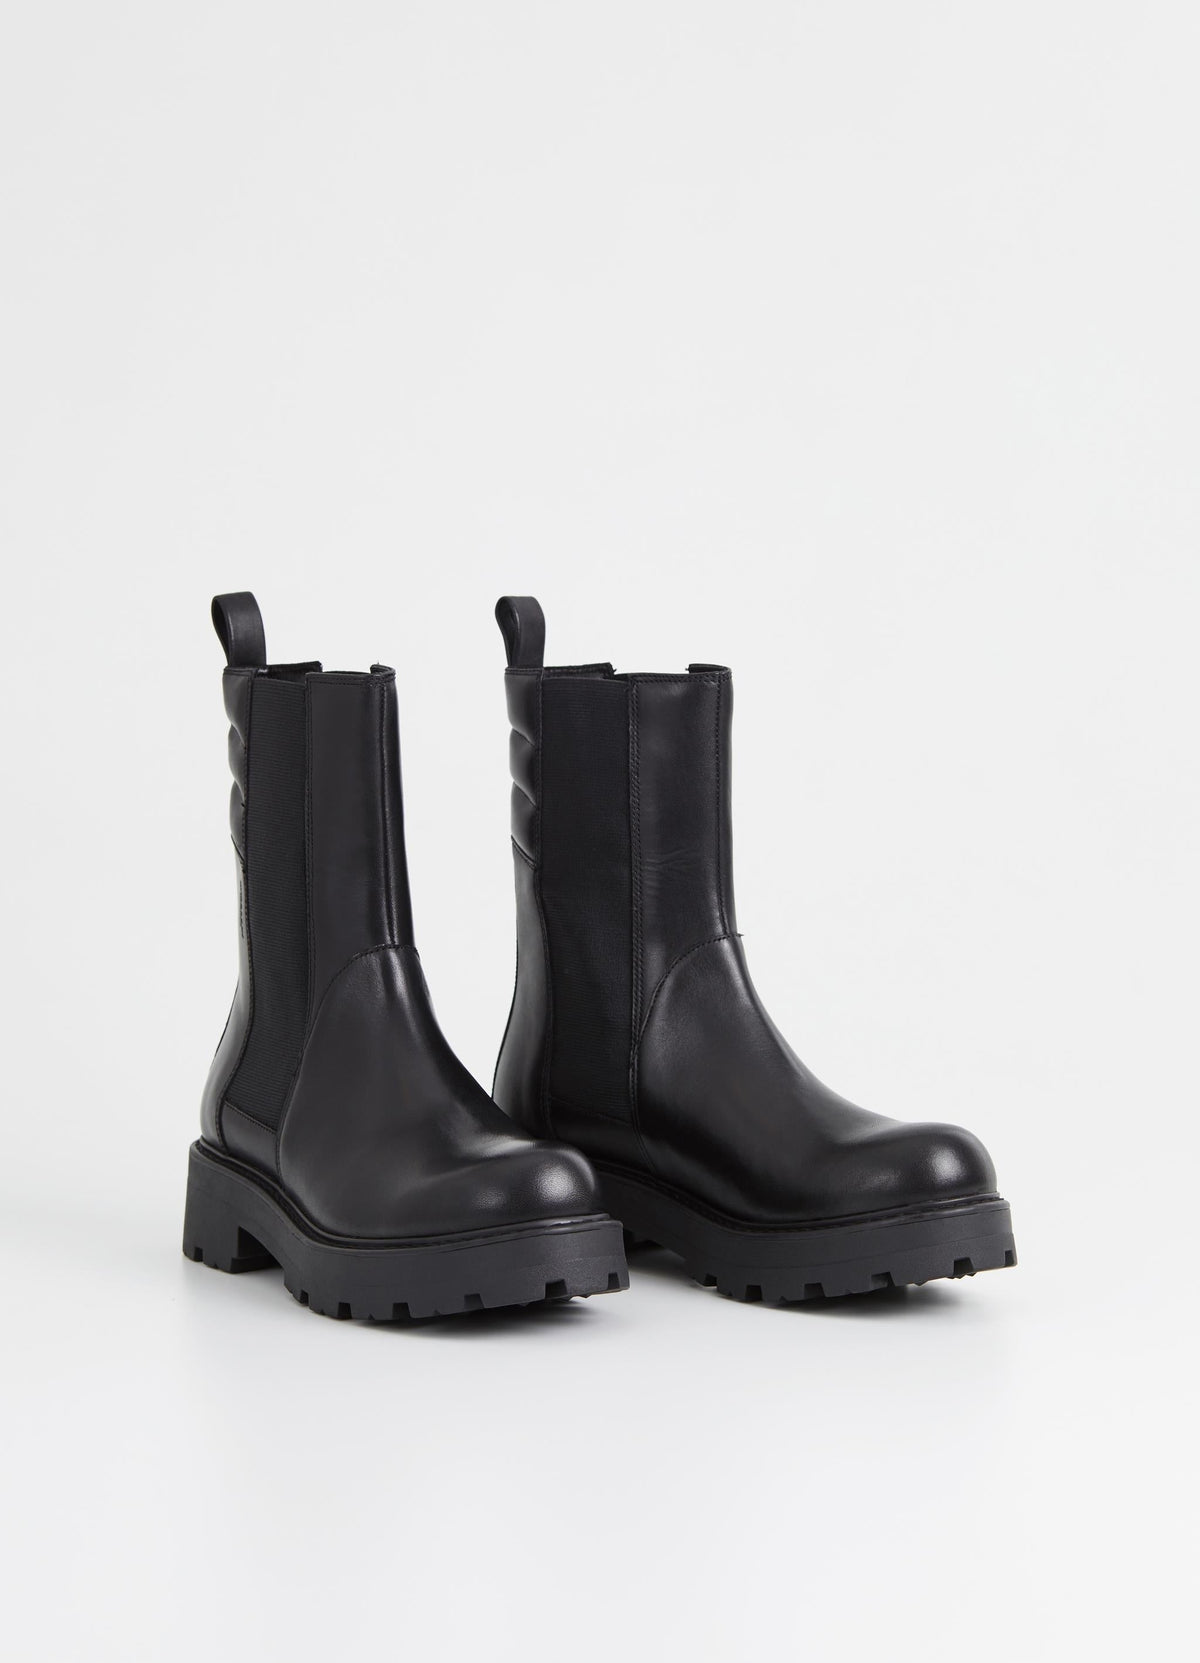 Chunky smooth black leather chelsea boot with elasticated side panels